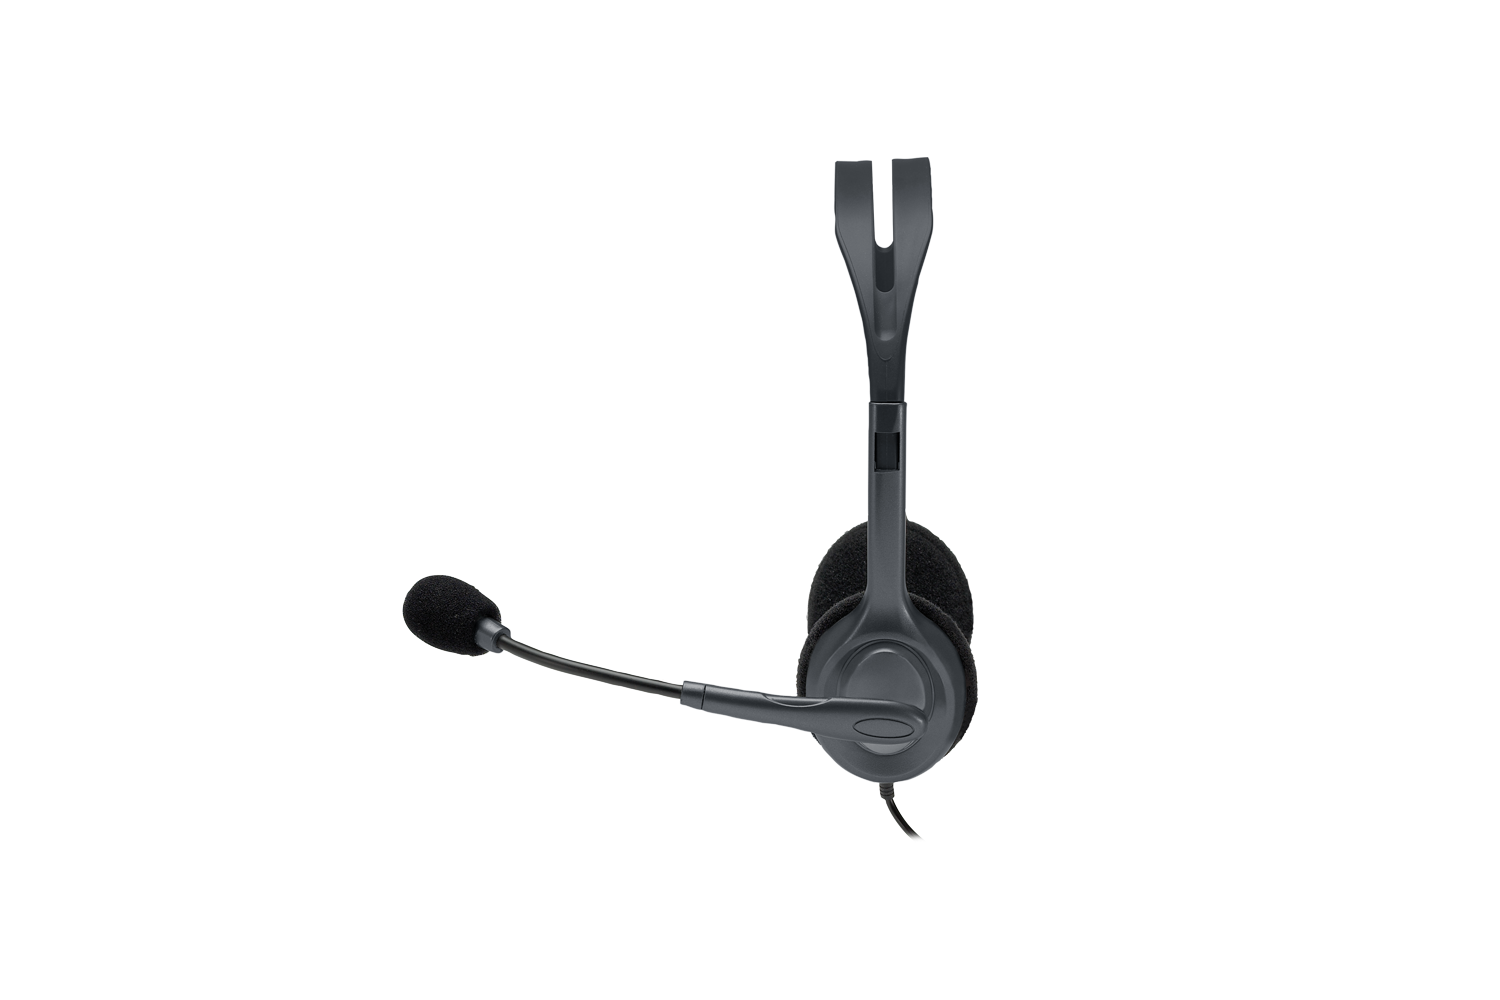 H111 Stereo Headset